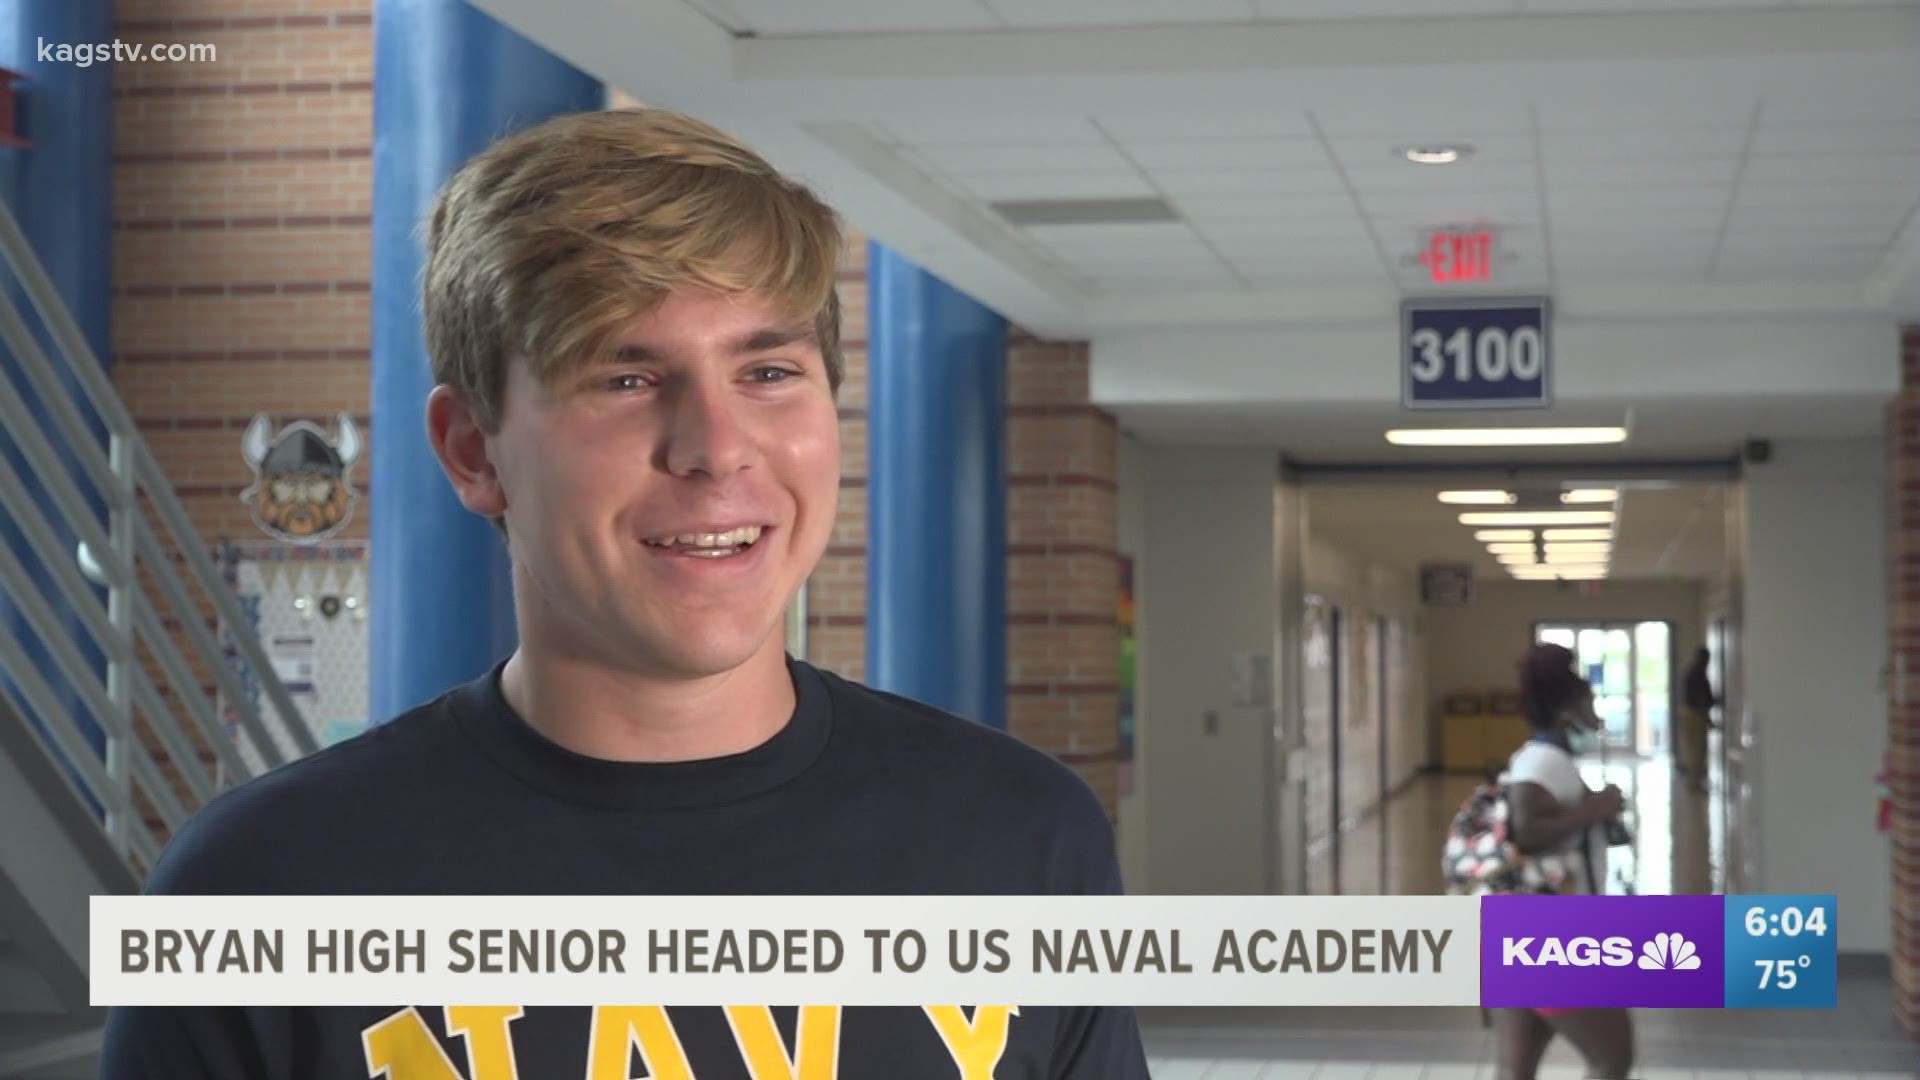 Helping him get into the naval academy was Congressman Pete Sessions, who offered his congratulations in person.